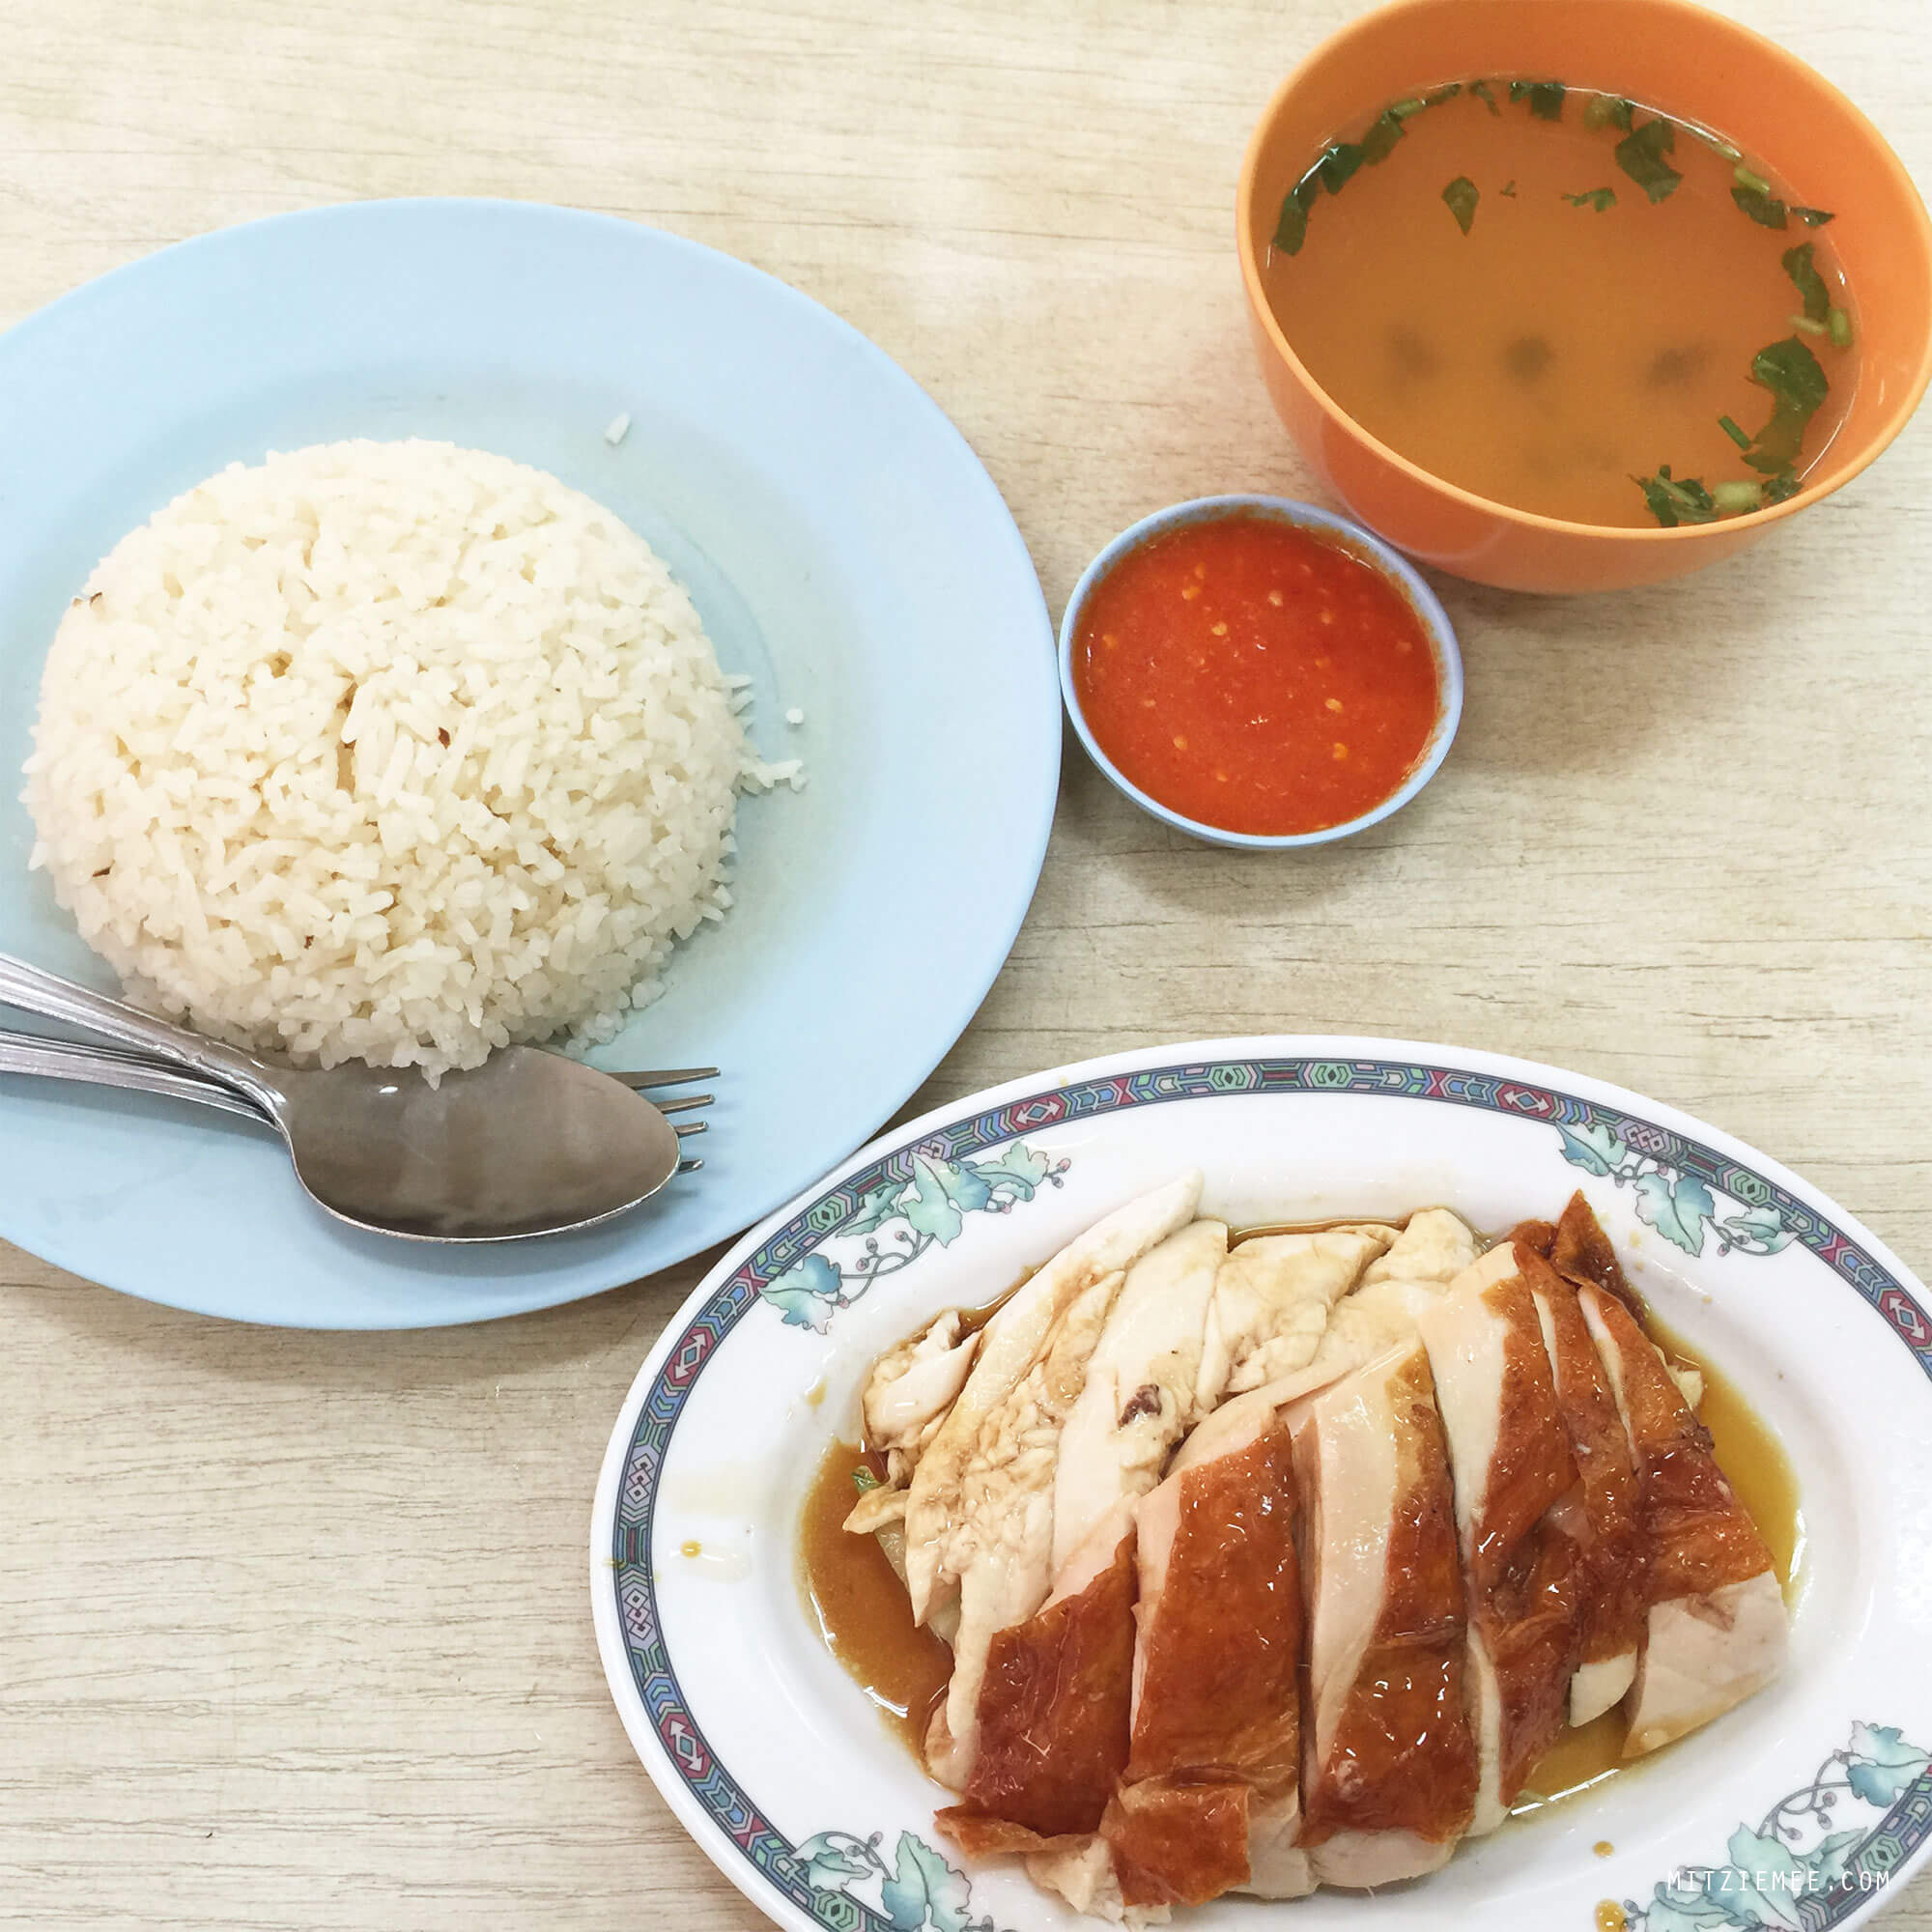 Leong Yeow Famous Waterloo Street Hainanese Chicken Rice in Singapore